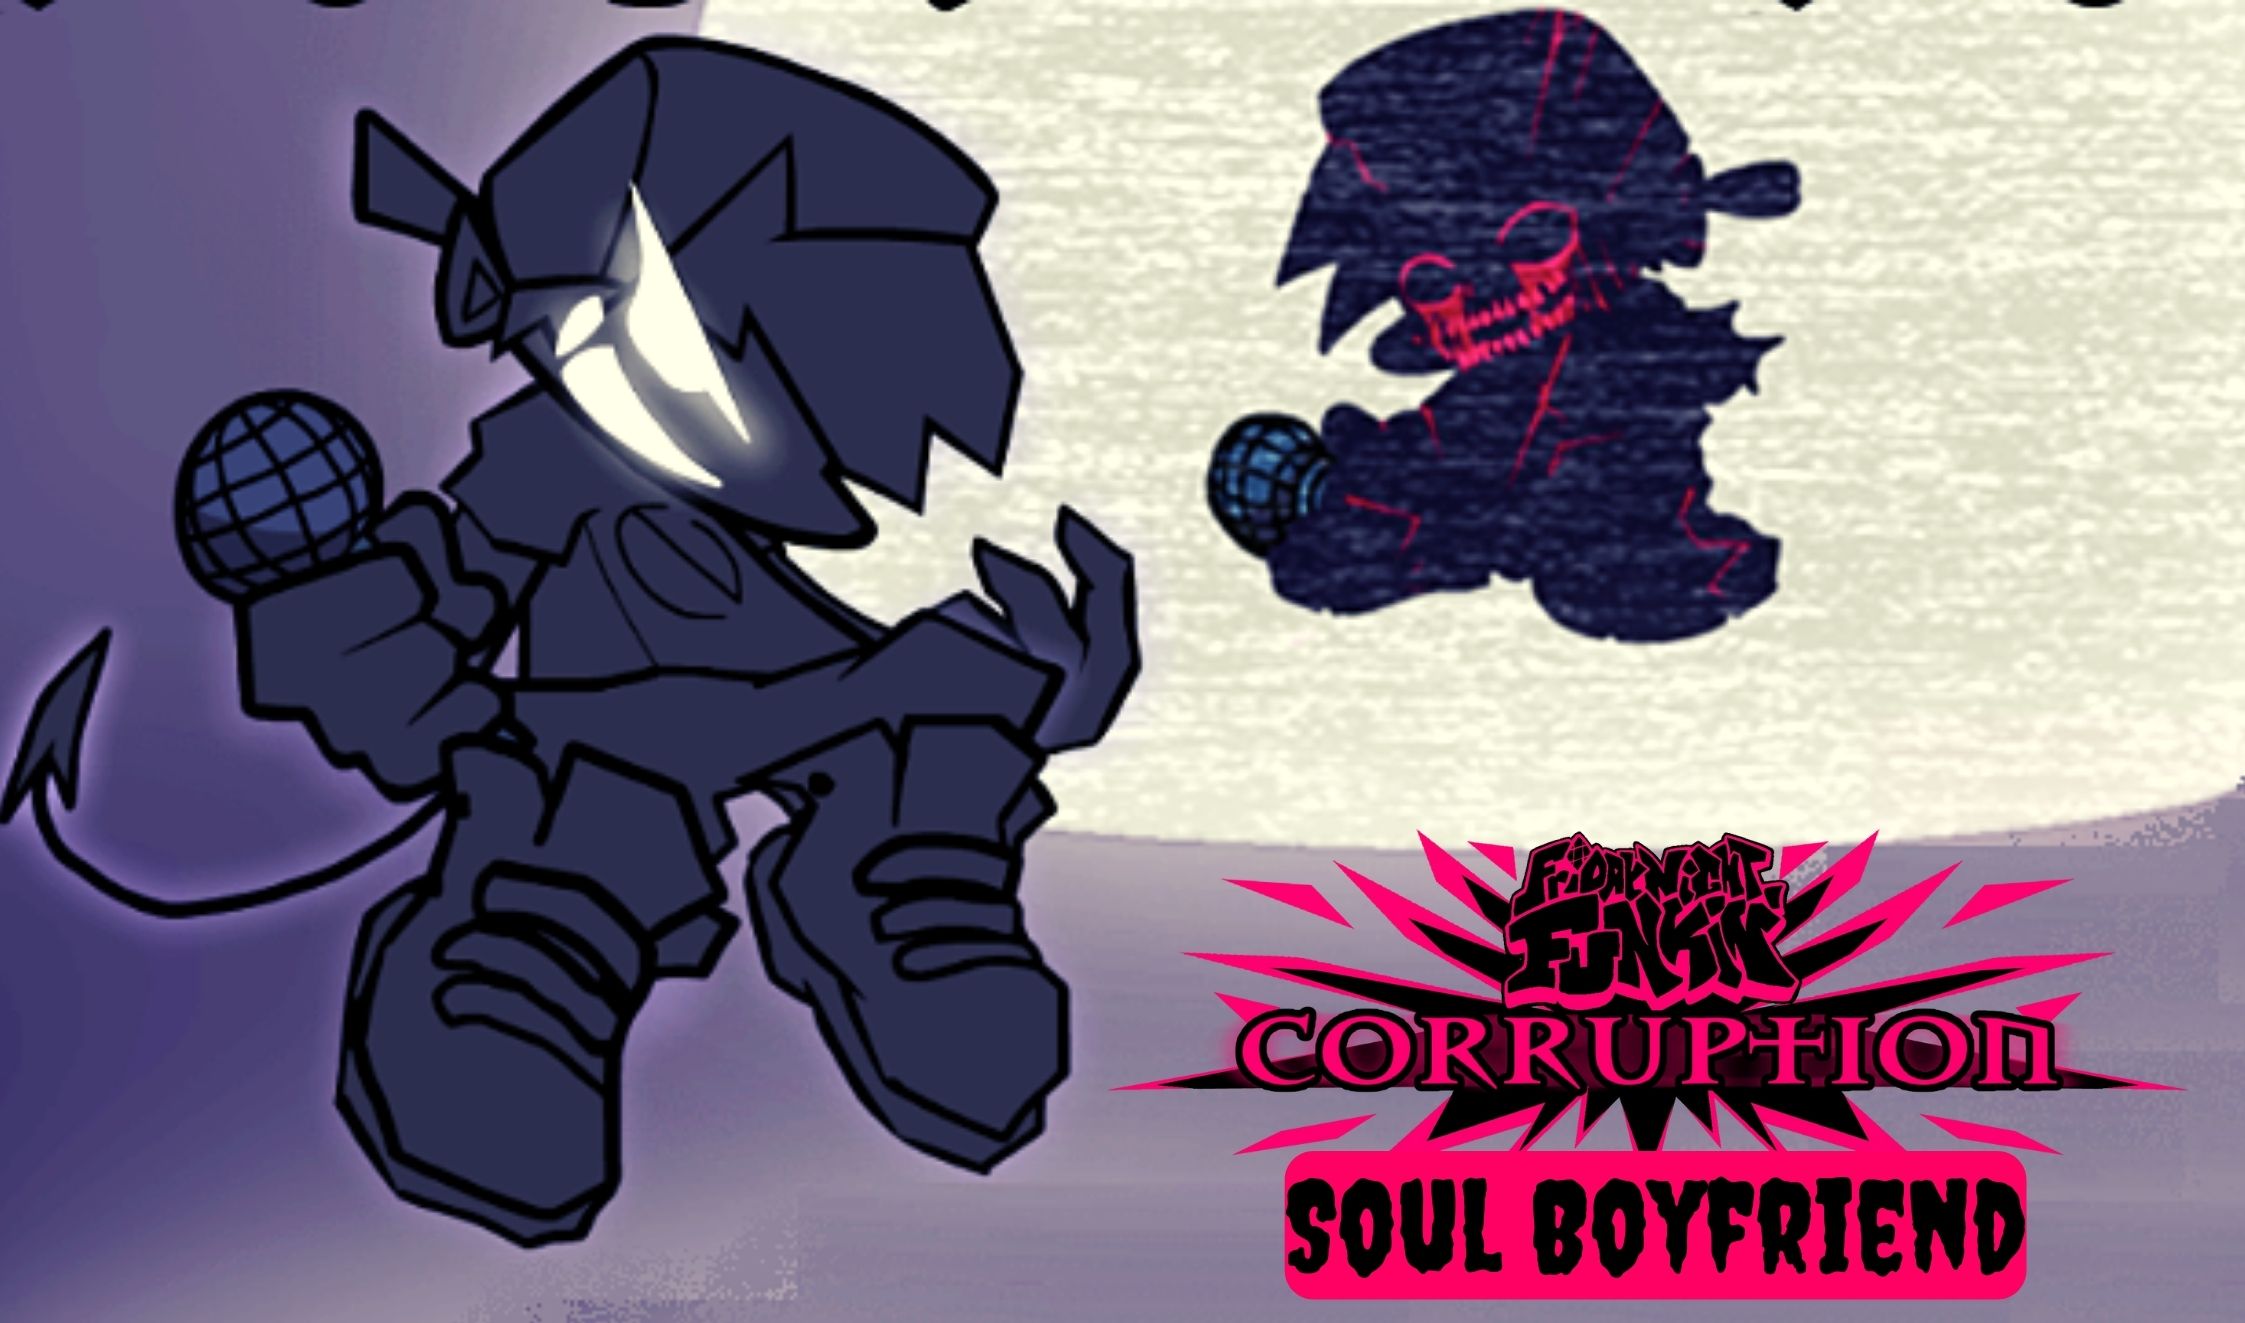 Soul Bf - Corruption mod (port android) Friday night funkin mod #fnf #